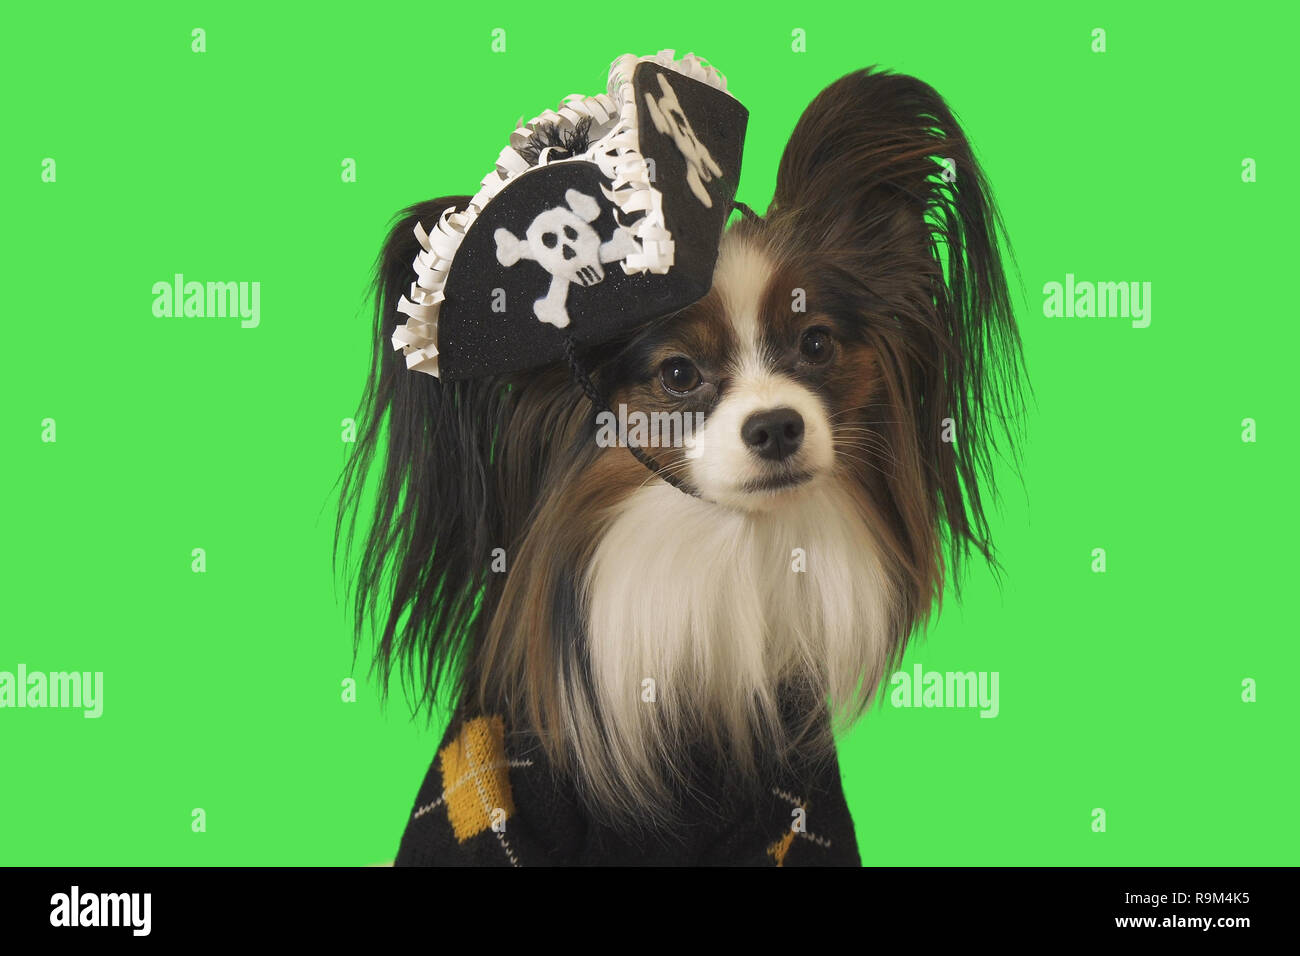 Beautiful dog Papillon in pirate costume on green background Stock Photo